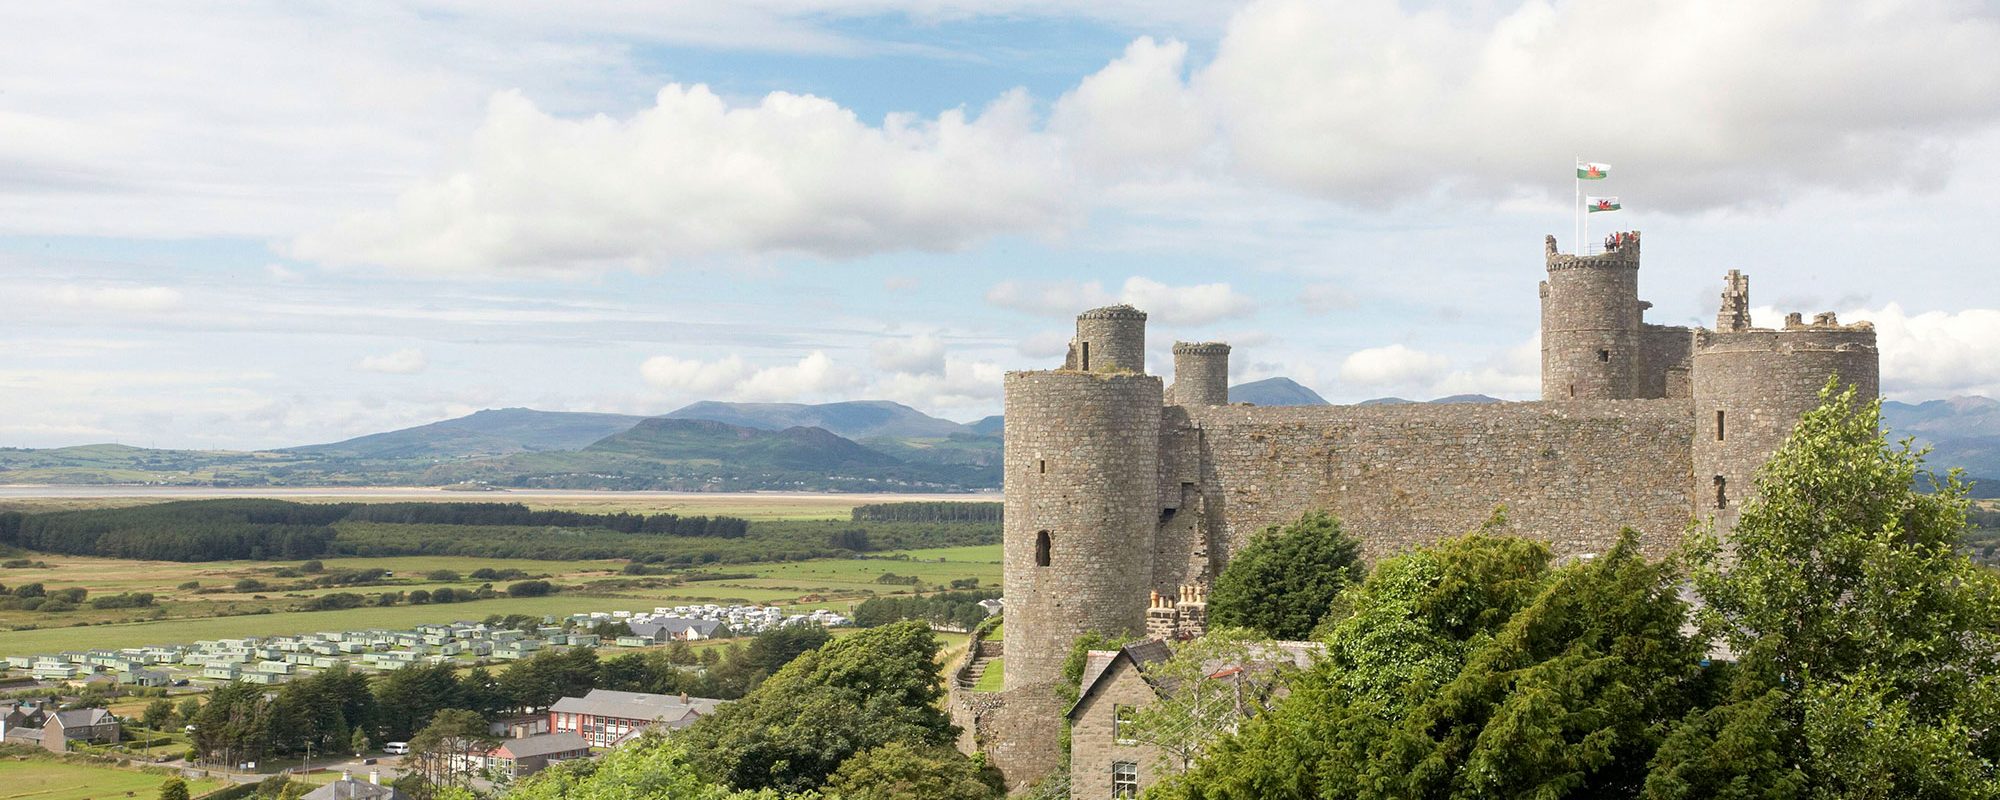 Gwynedd Council launches an online course to learn more about the county’s heritage, habitats and history